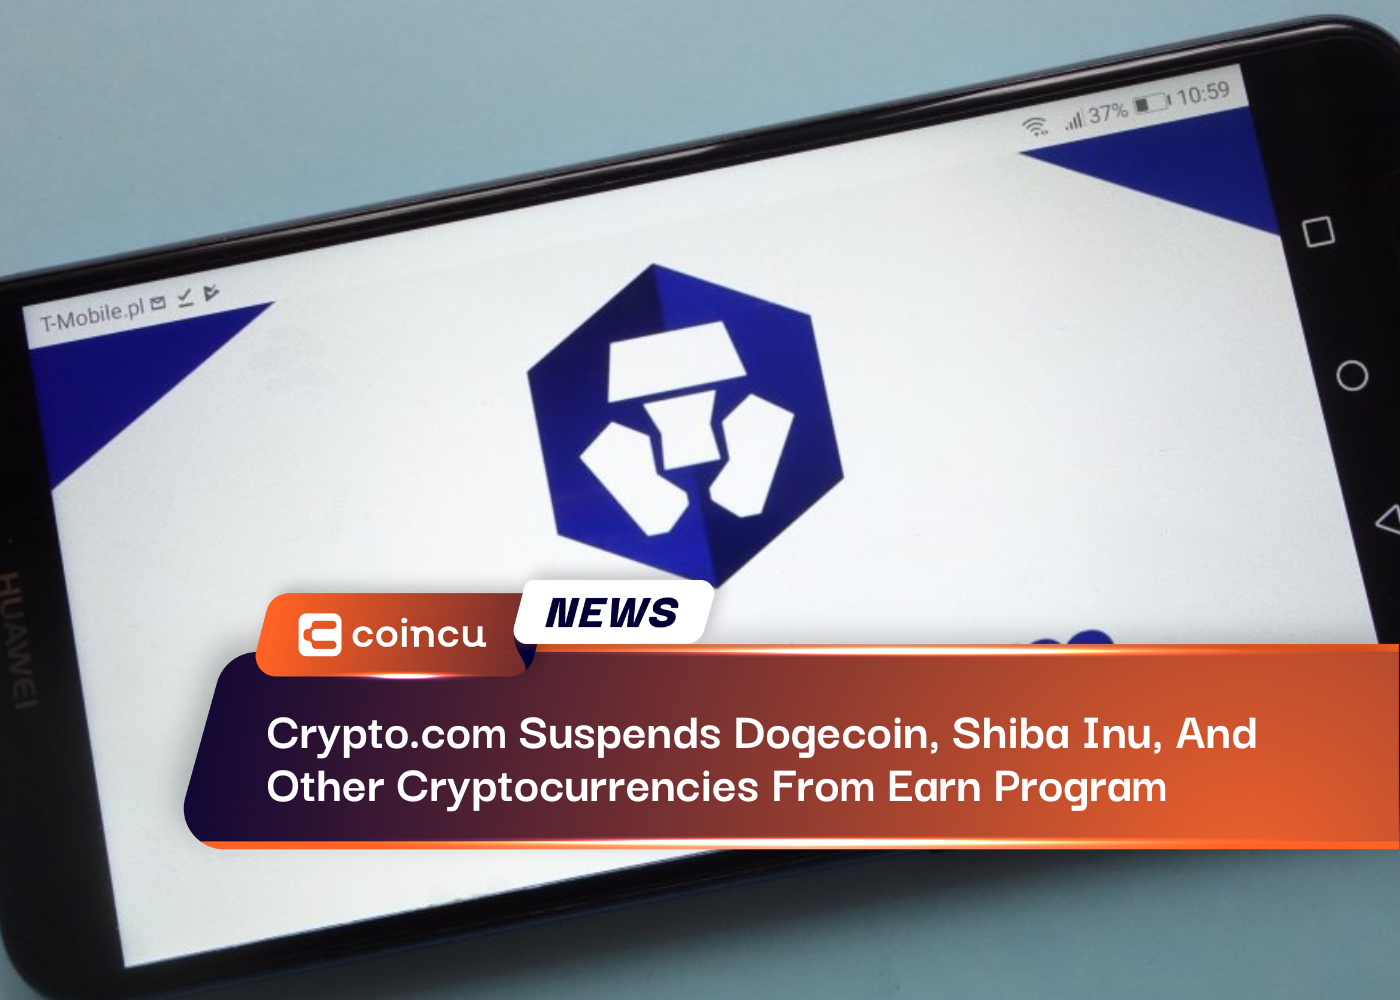 Crypto.com Suspends Dogecoin, Shiba Inu, And Other Cryptocurrencies From Earn Program